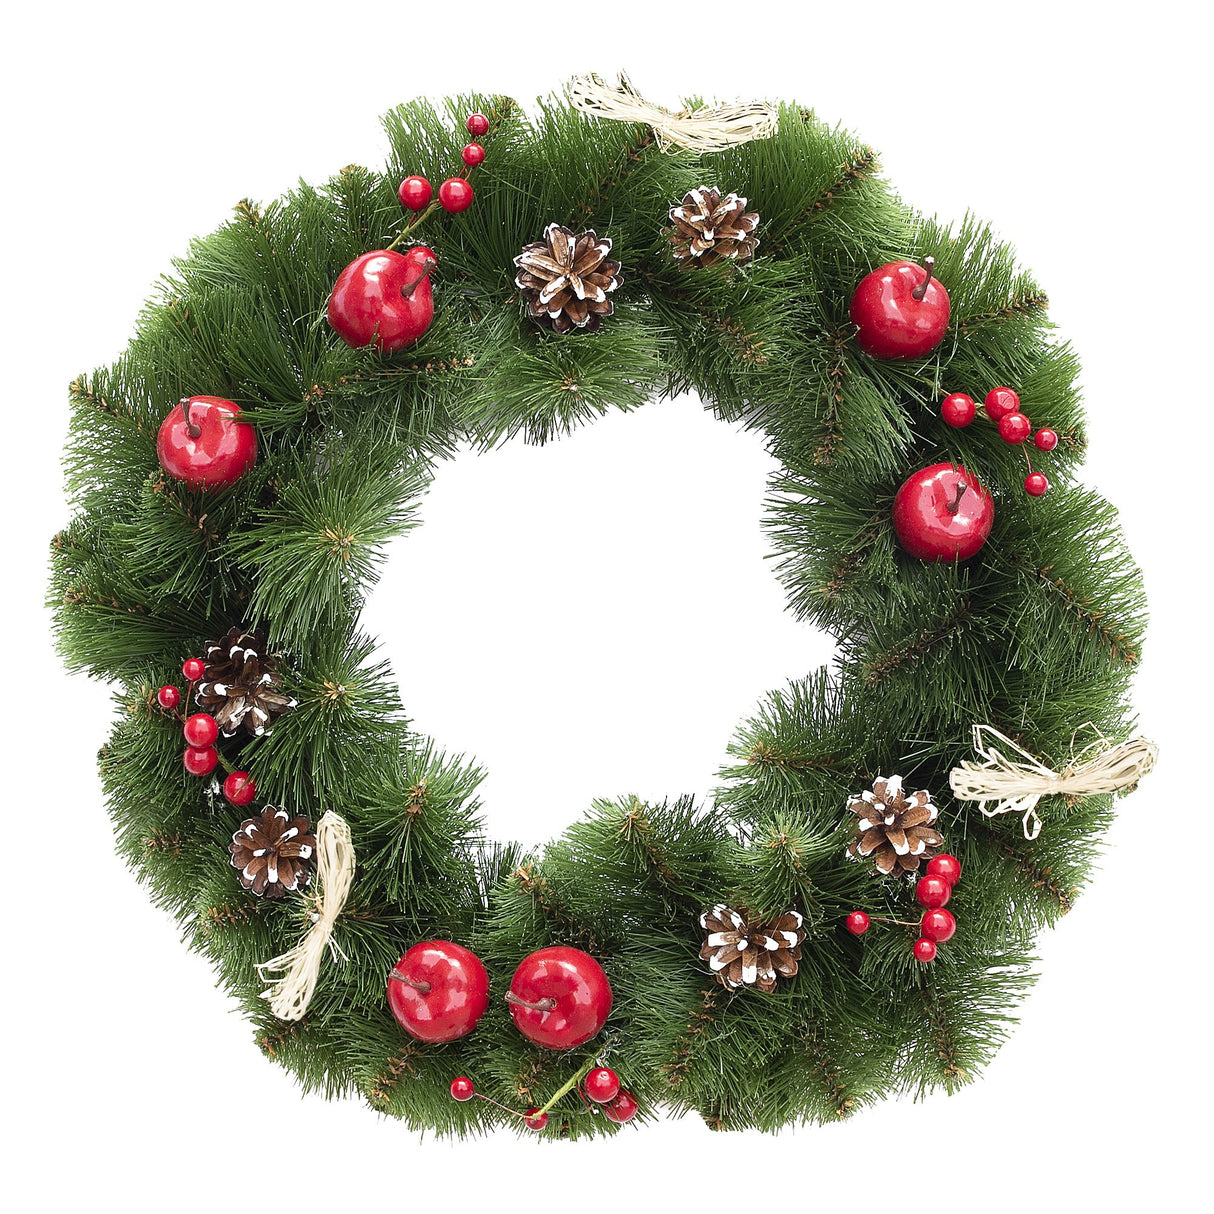 Ukrainian Christmas Wreath with Frosted Straw Bows, Apples & Pine Cones 20 Inches in Green color, Round shape